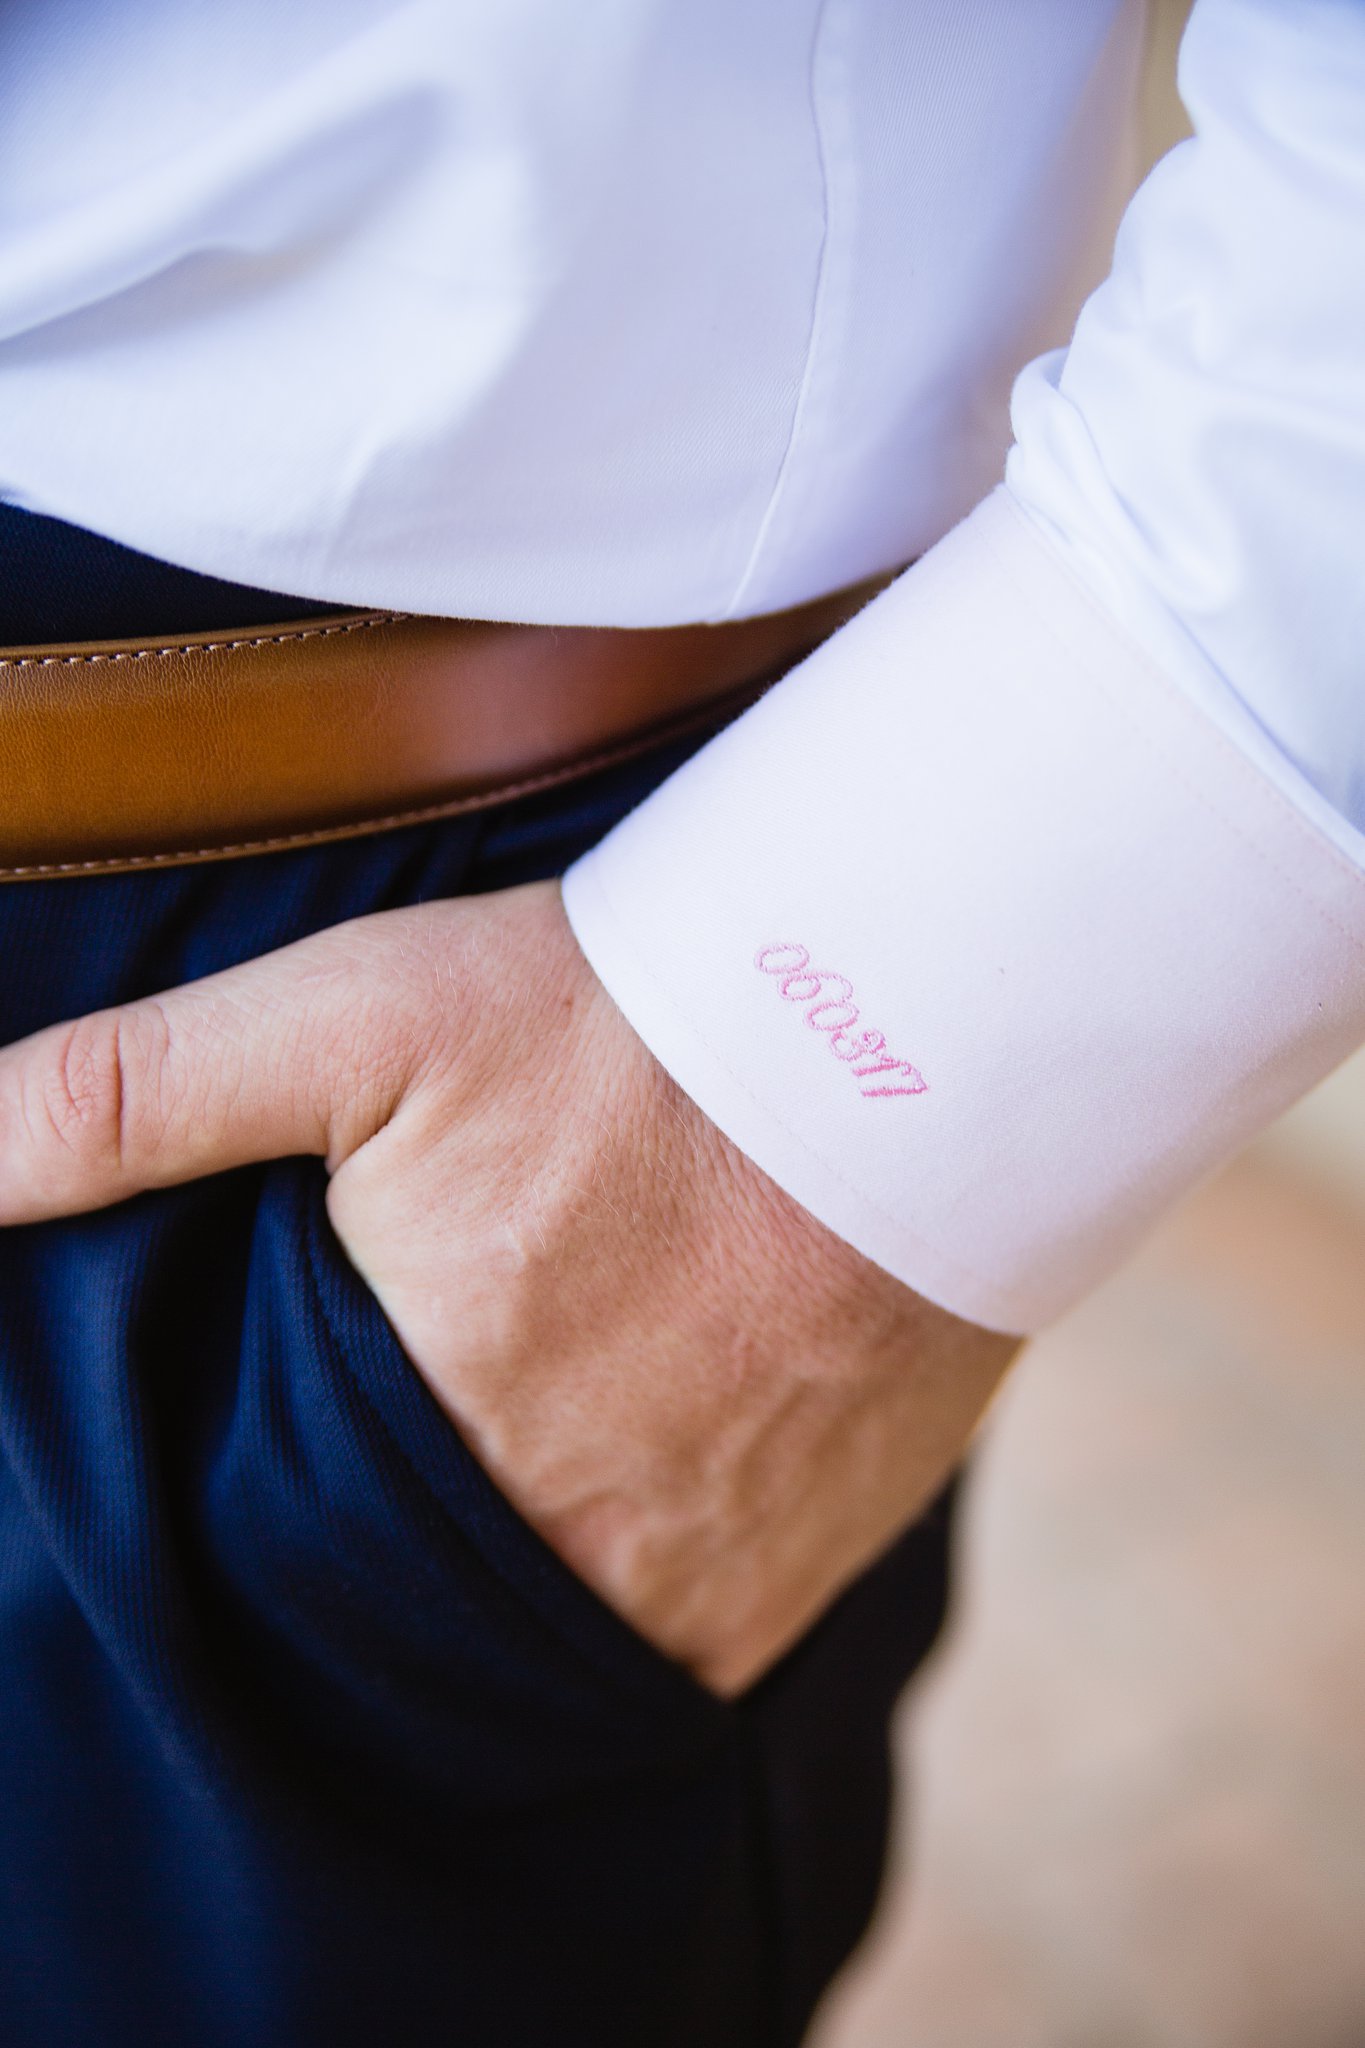 Groom's wedding day details of the wedding date embroidered into his shirt cuff by PMA Photography.